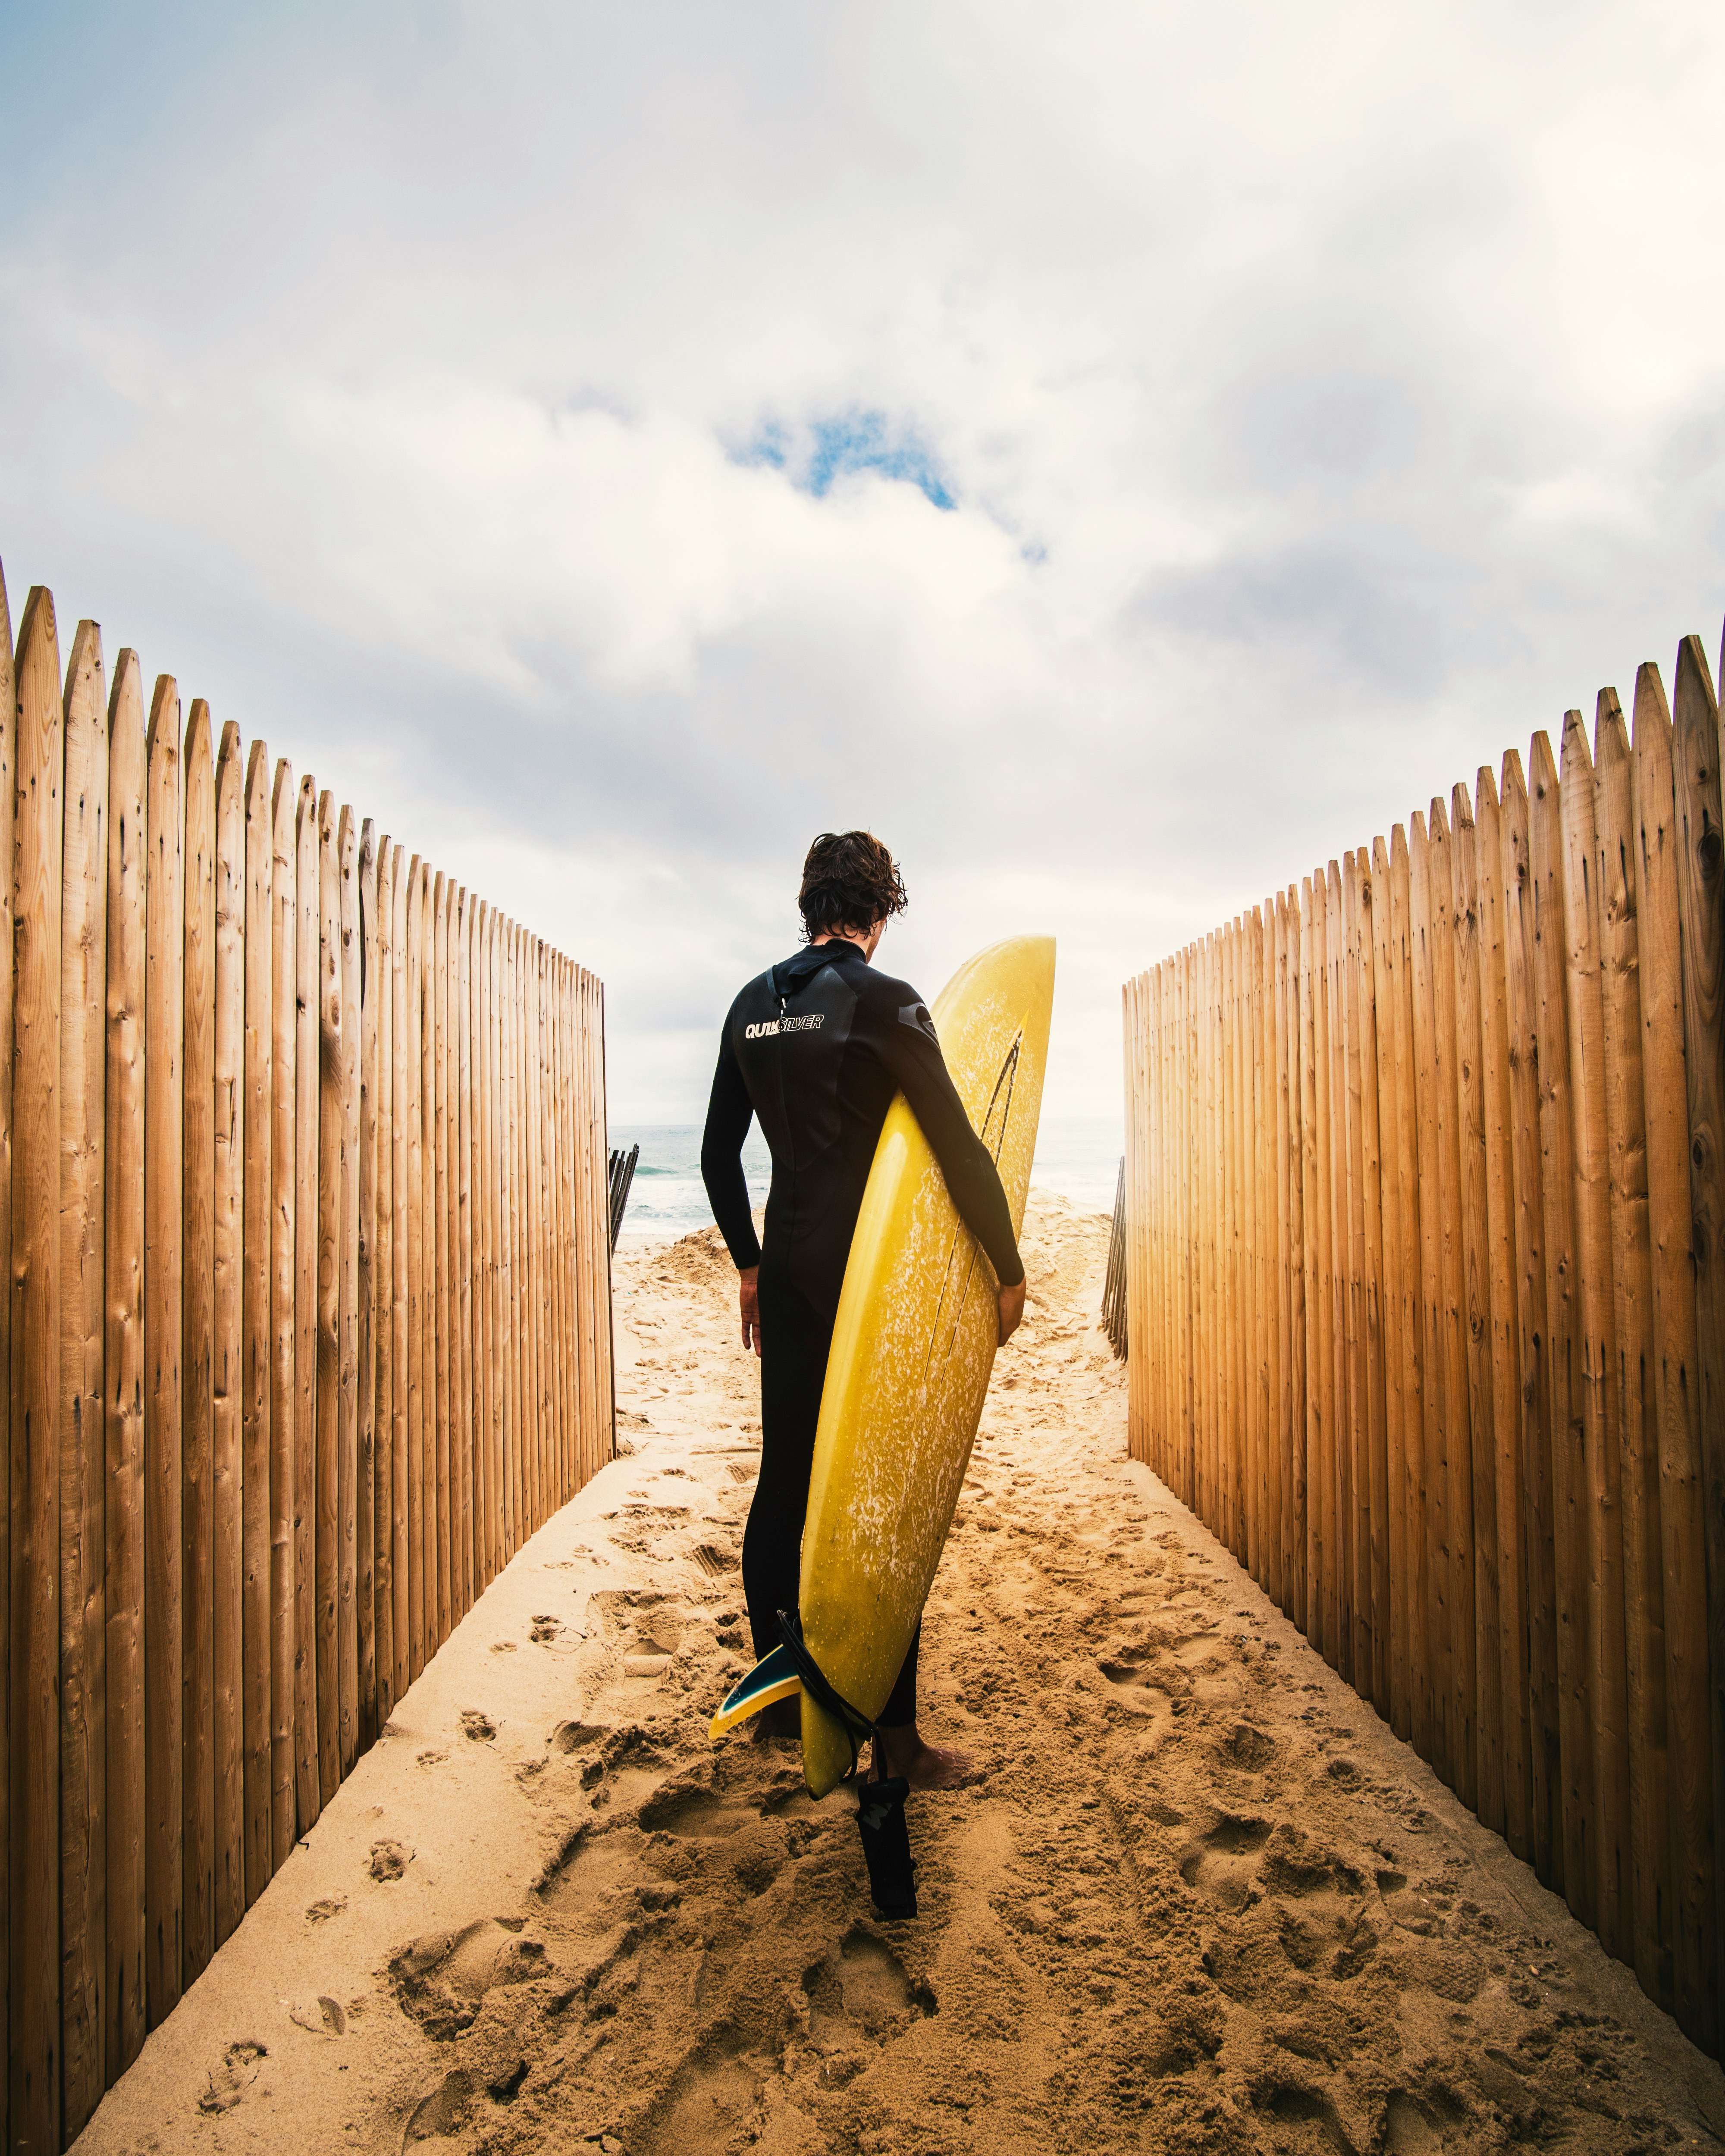 person standing between privacy fences while holding yellow surfboard during daytime